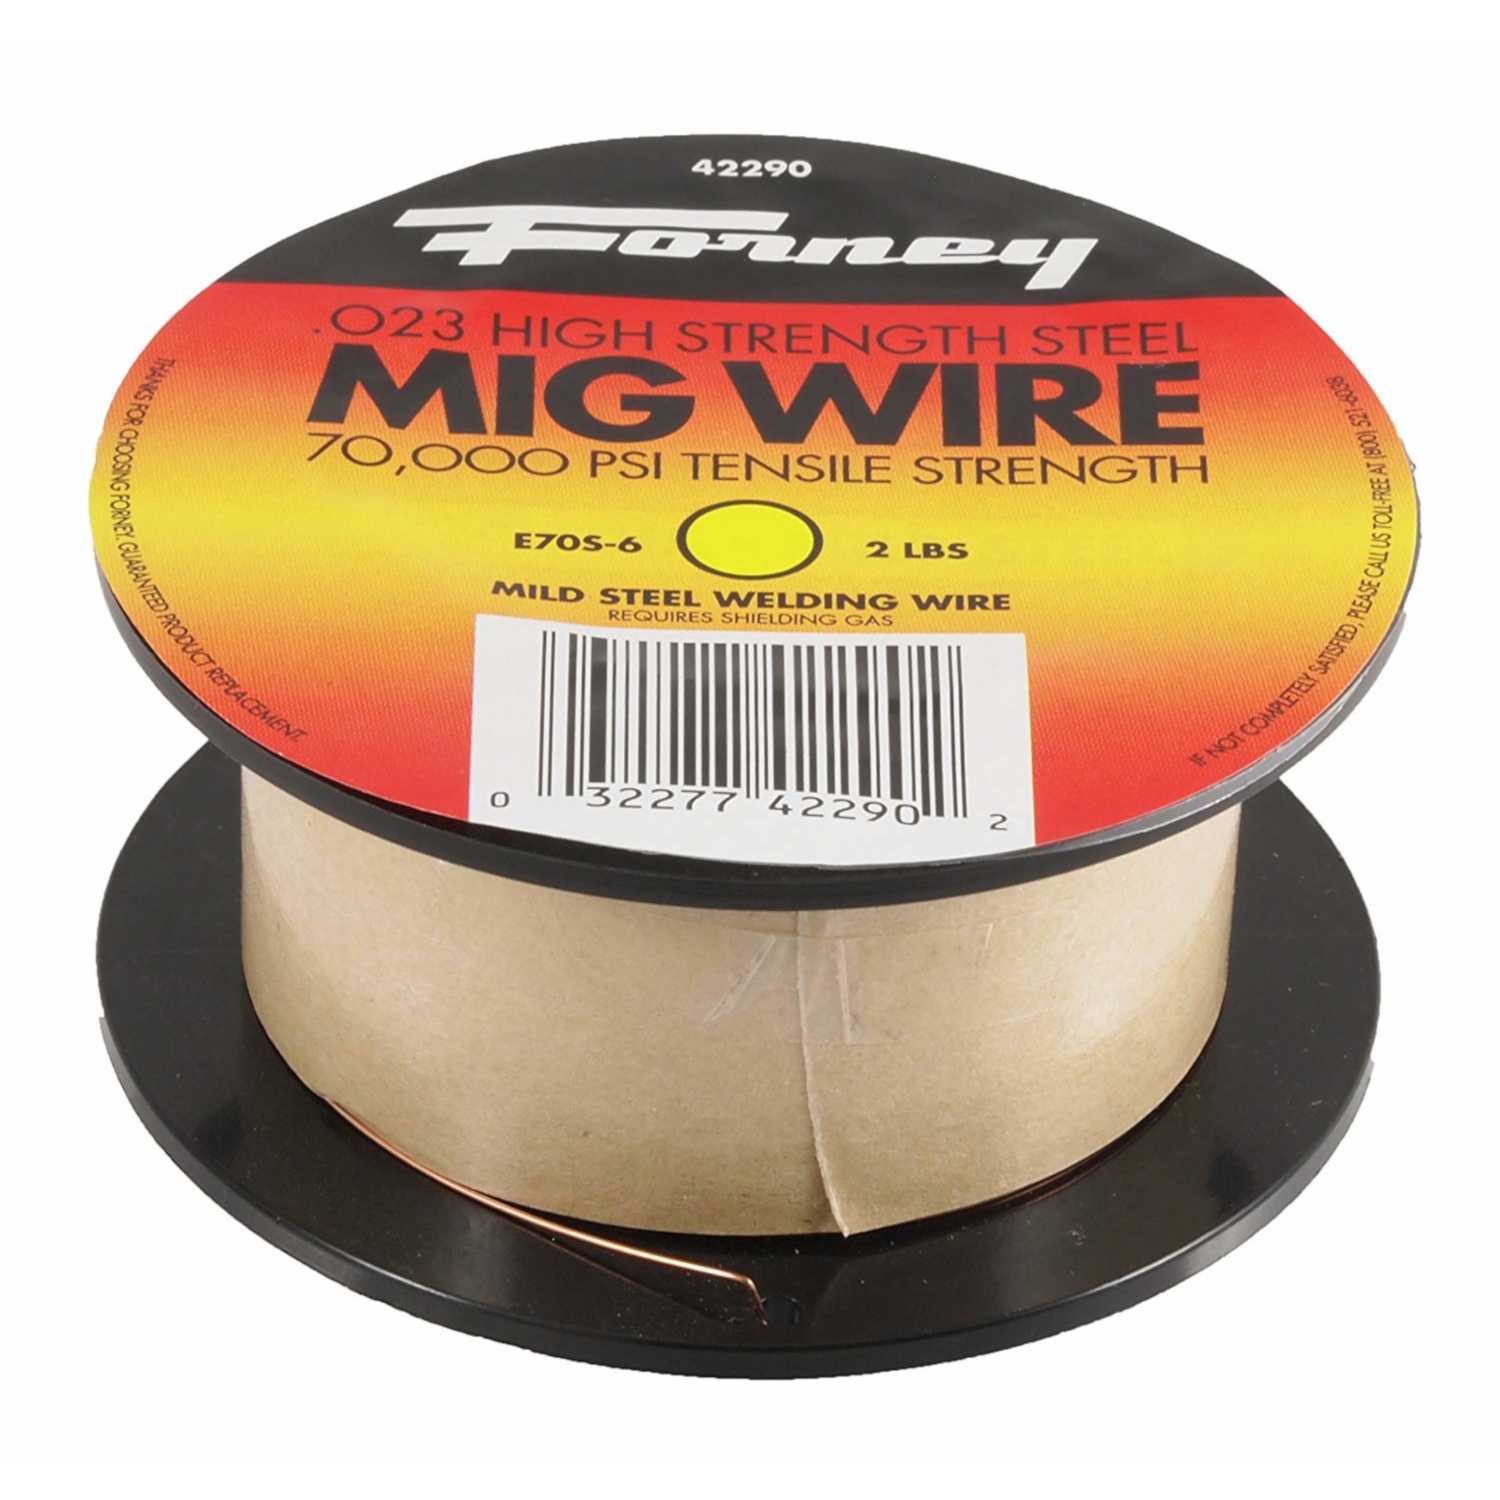 Forney 0.024 in. Mild Steel MIG Welding Wire 70000 psi 2 lb. Ace Hardware